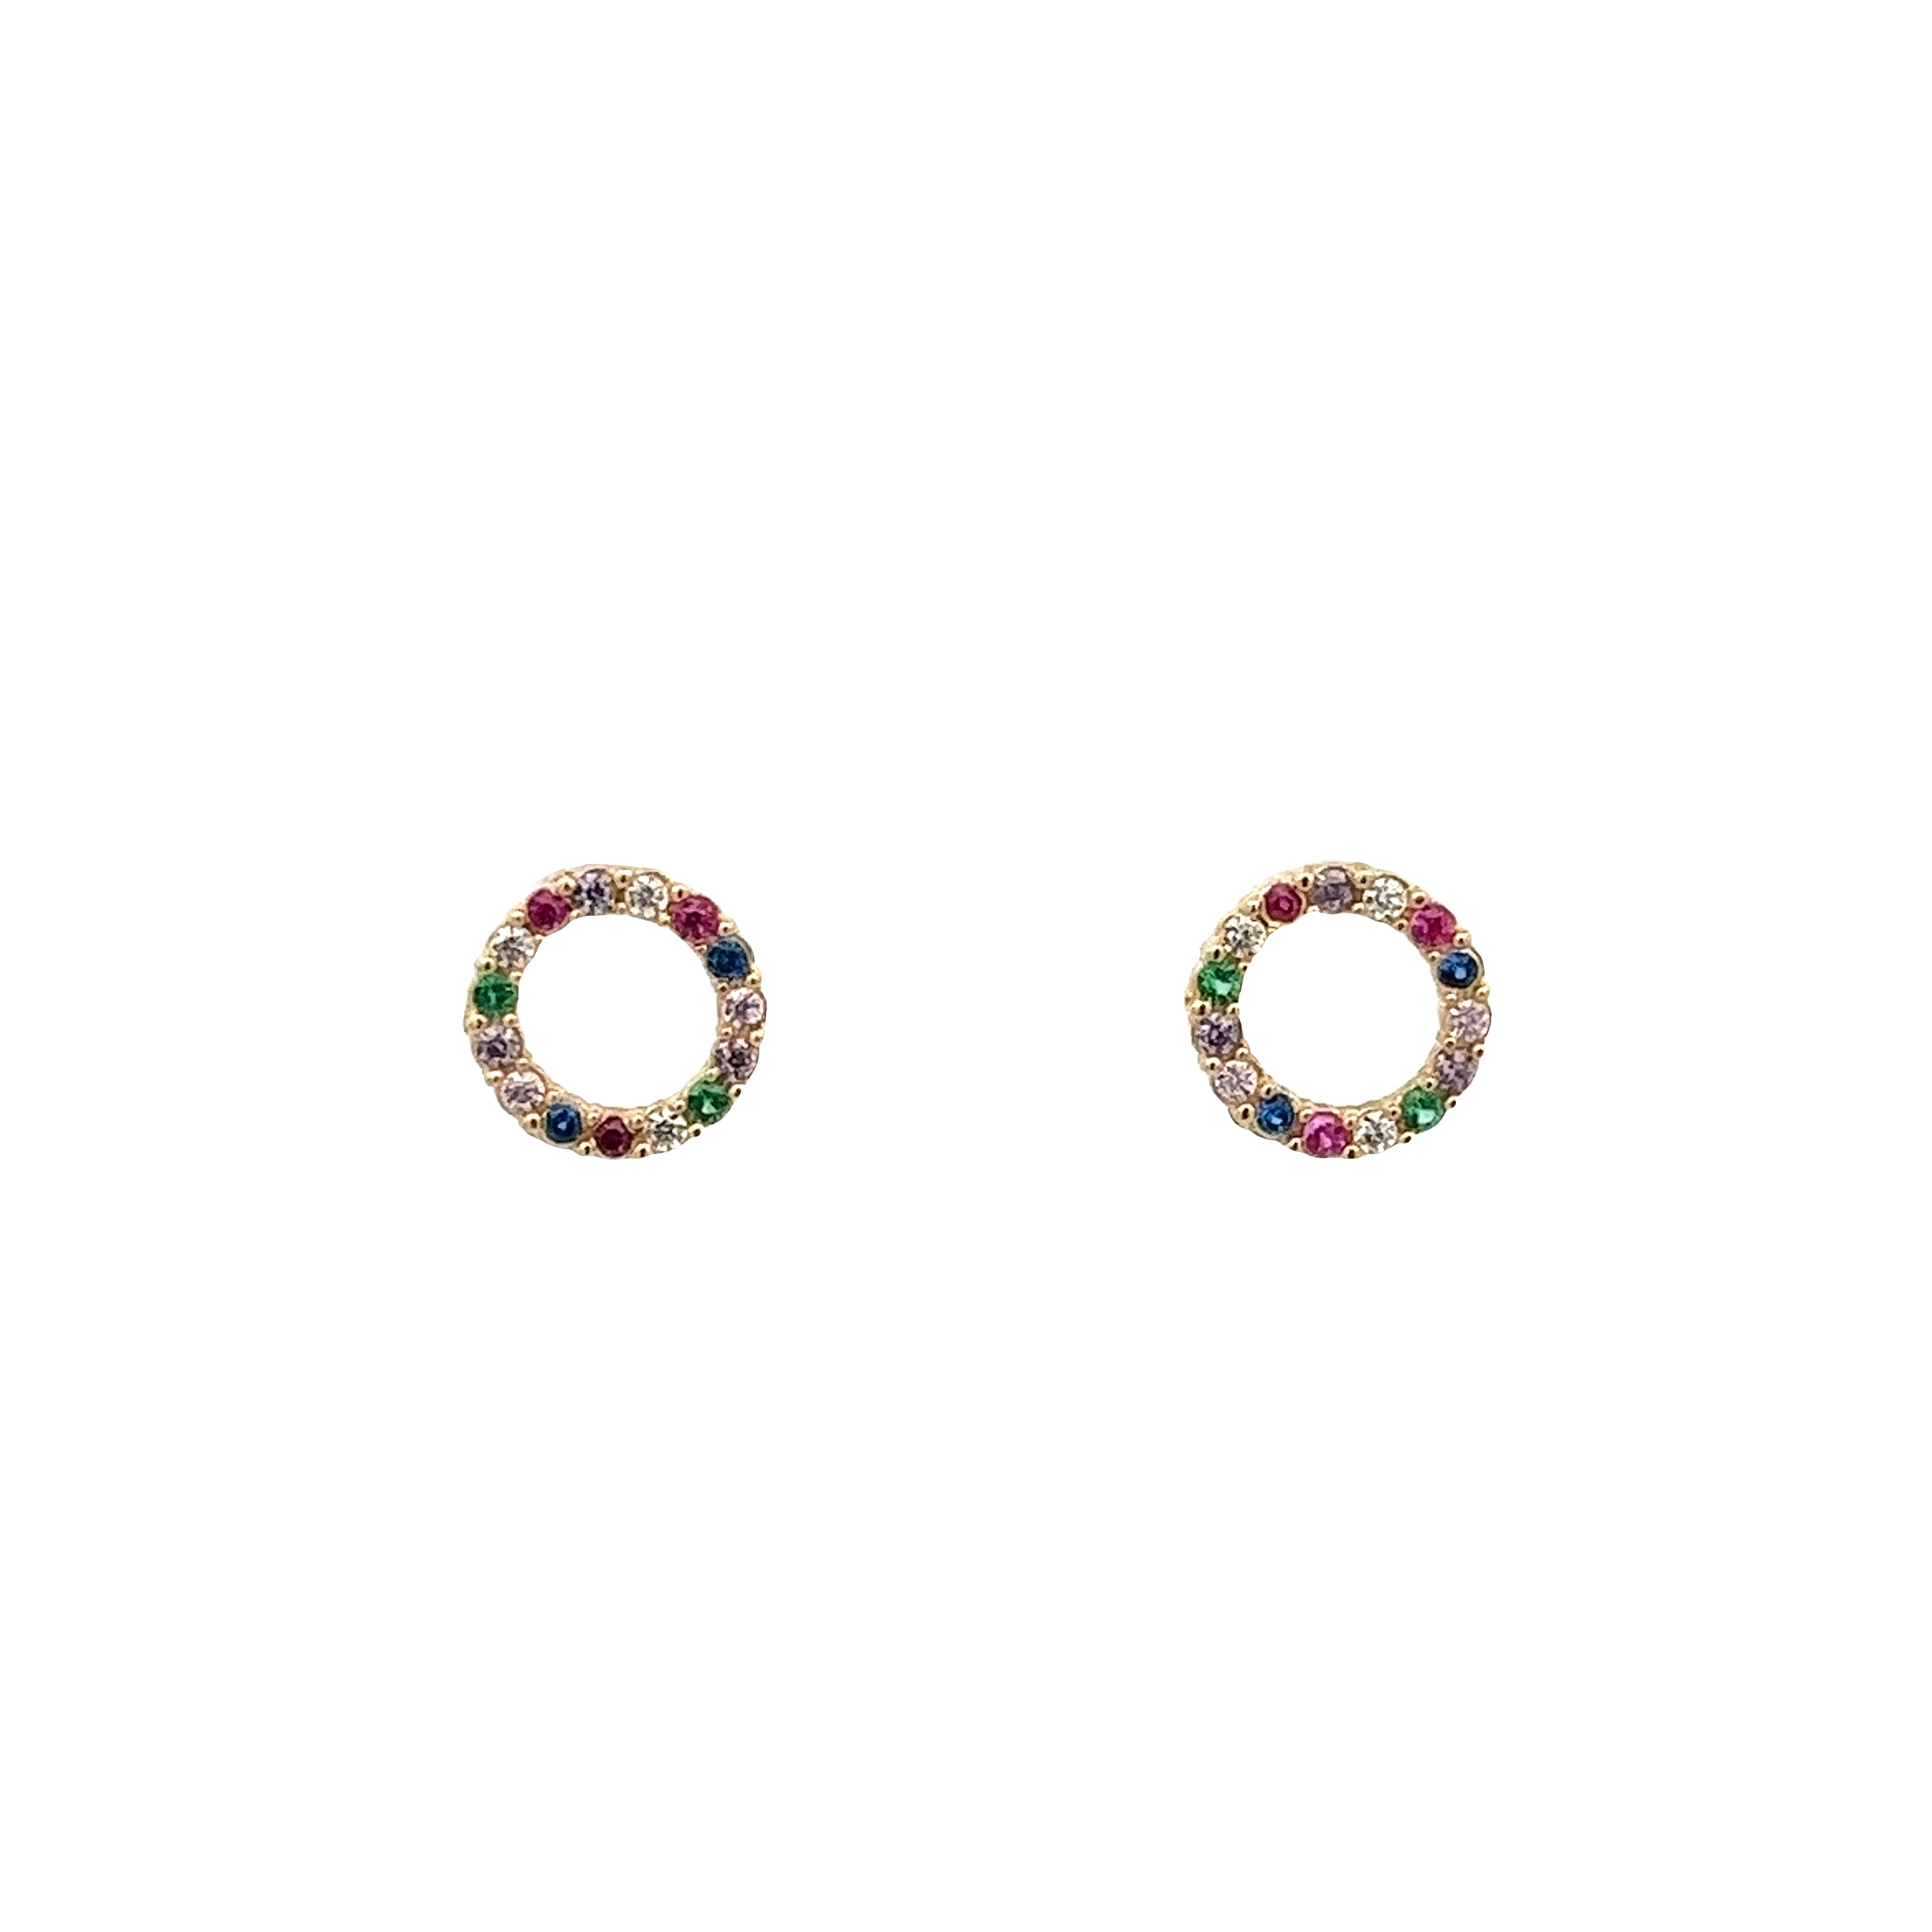 14K GOLD PAVE MULTICOLOR CIRCLE EARRINGS